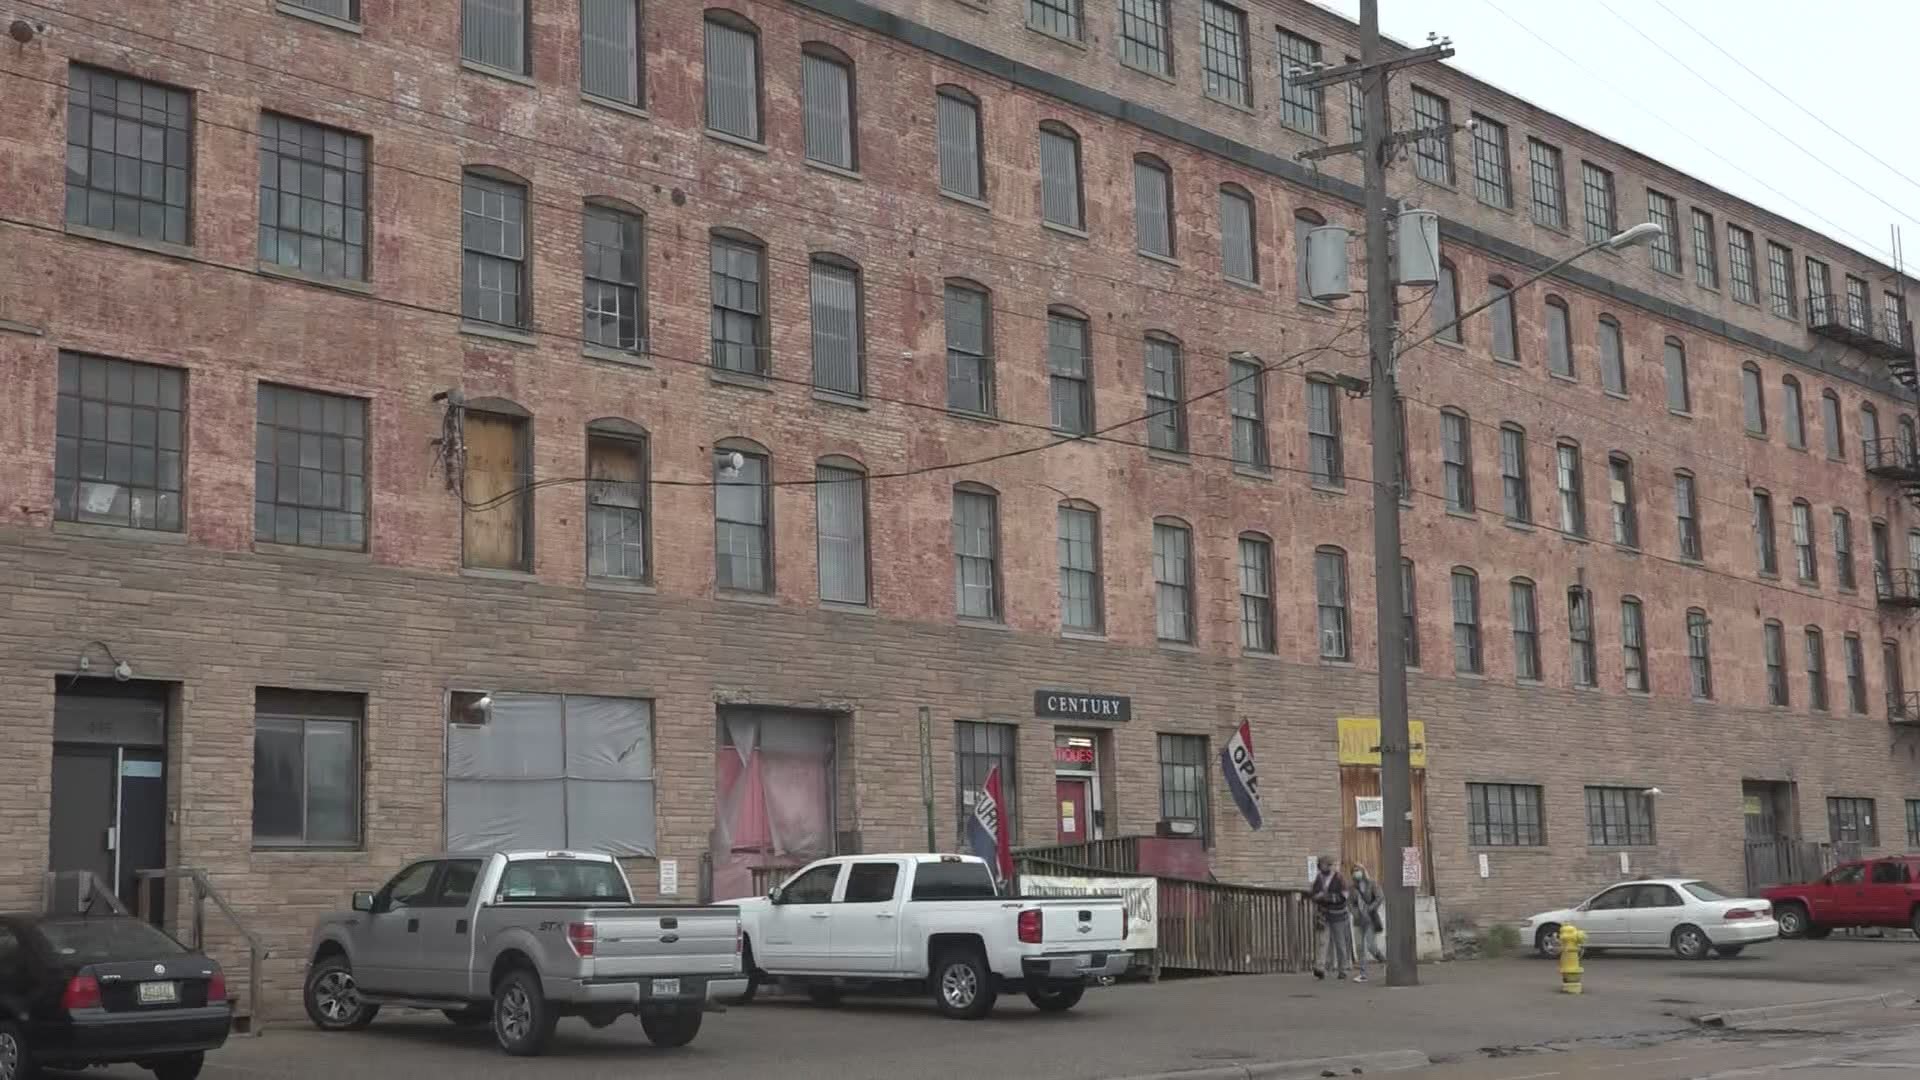 Antique store owners are worry their businesses could be in jeopardy, after the city of Grand Rapids approved plans to build a six story building near the site